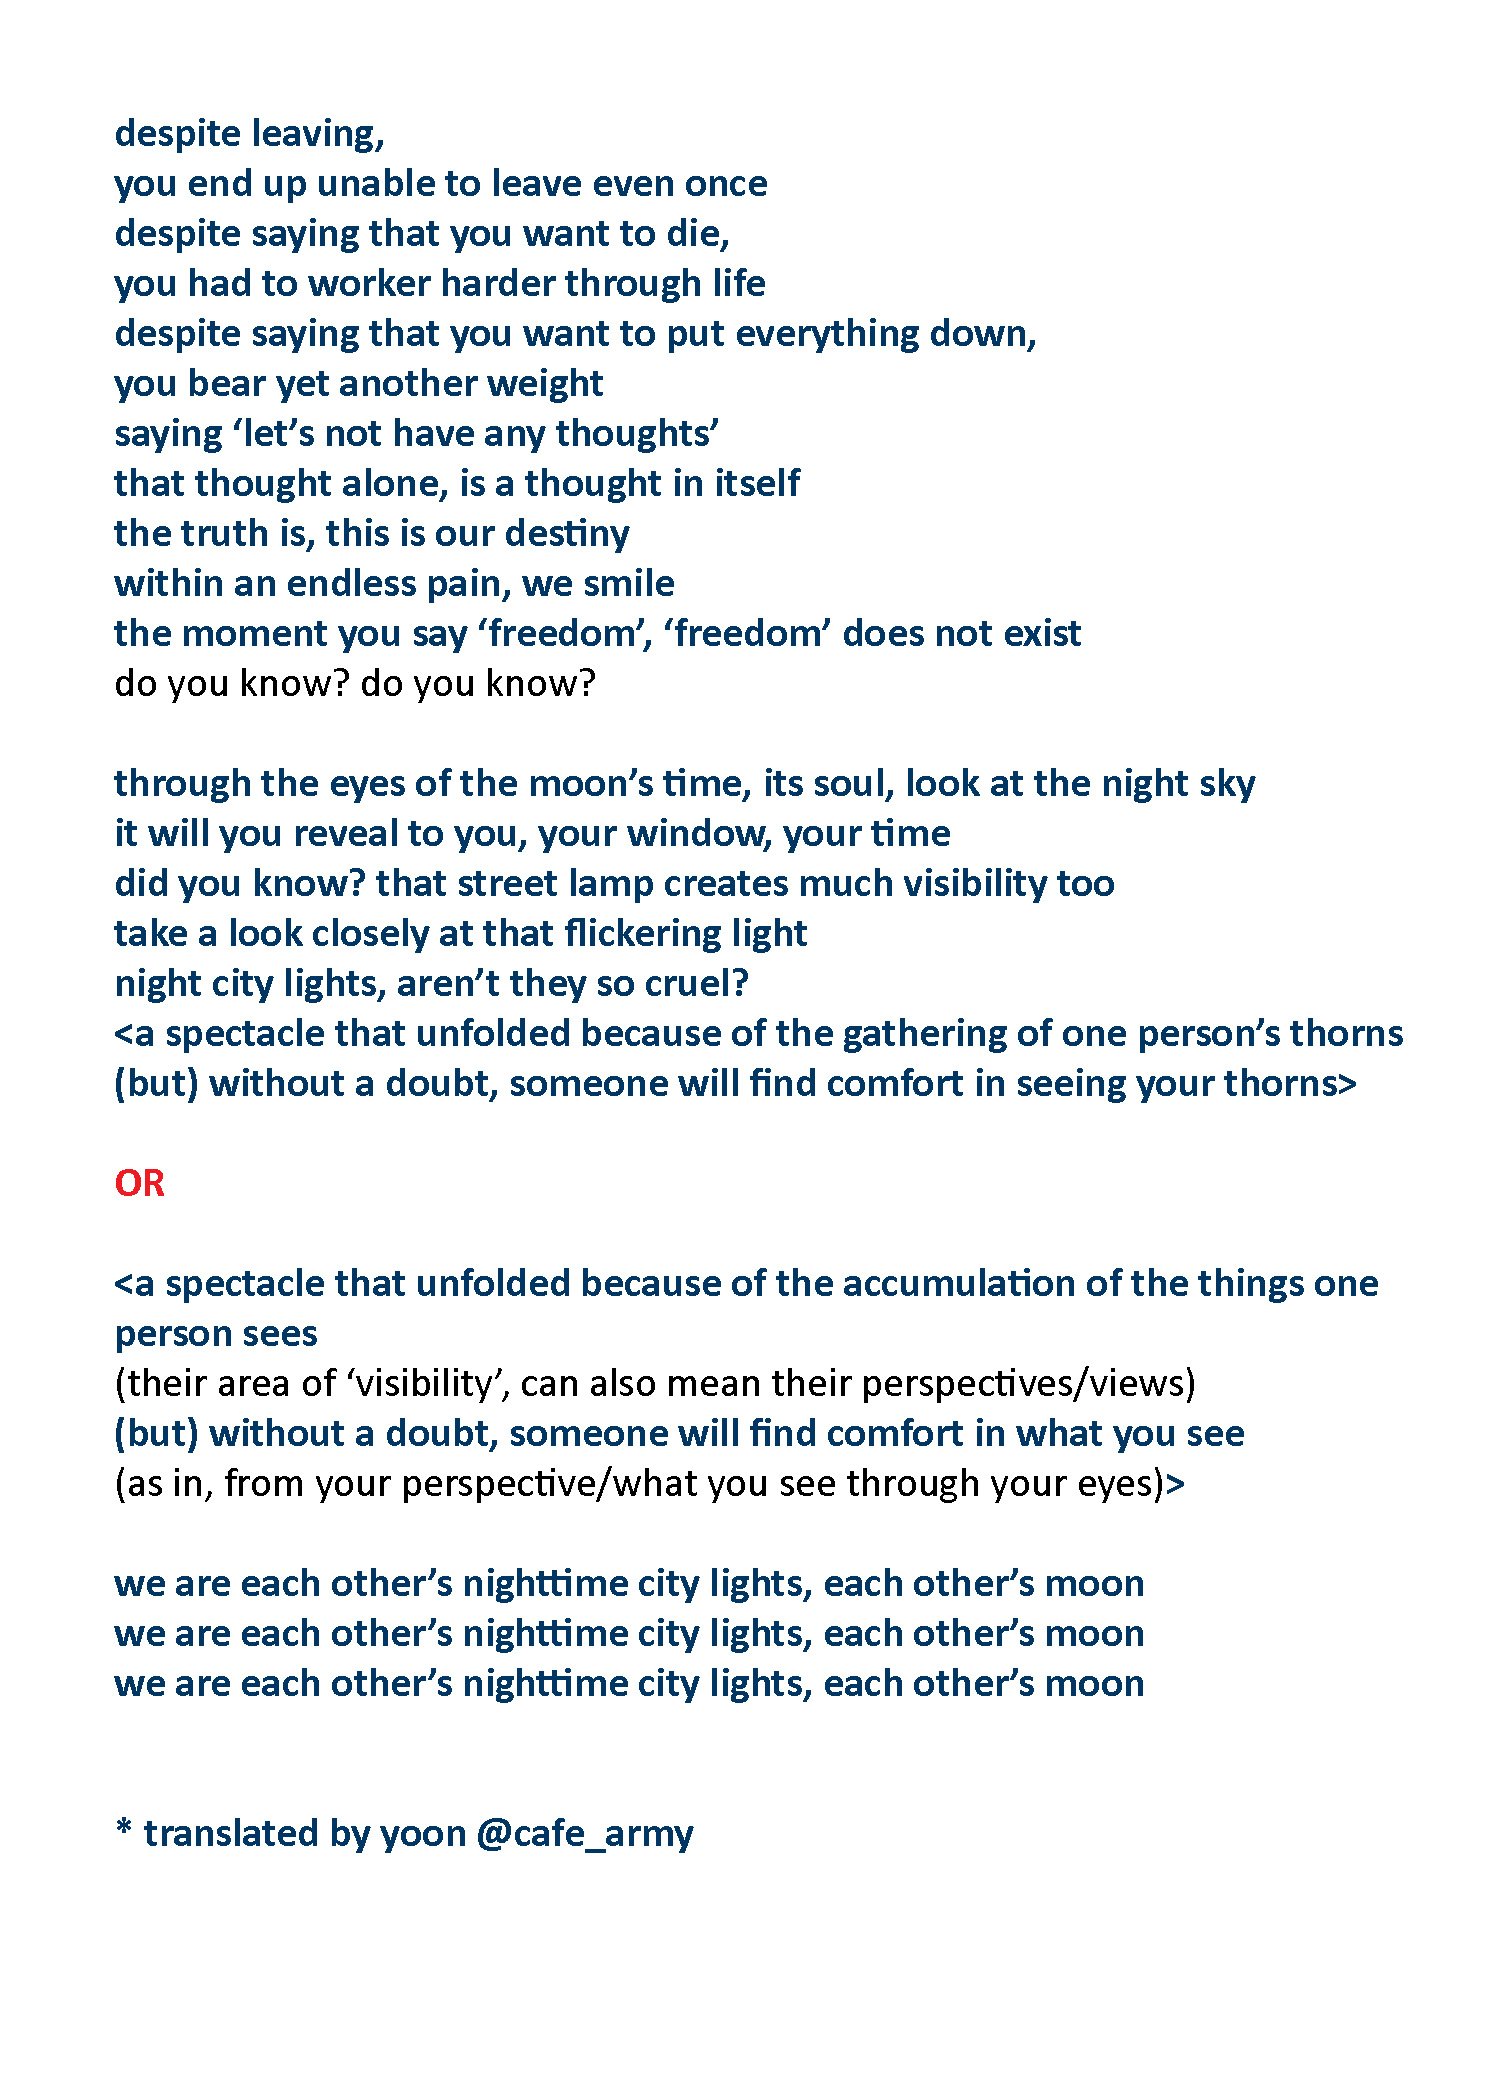 Rest Cafe Army A Closer Look At Moonchild Lyric Translation Analysis The Message Behind This Track Is So Incredibly Deep Personal And Heart Breaking But Also Encouraging Hopeful